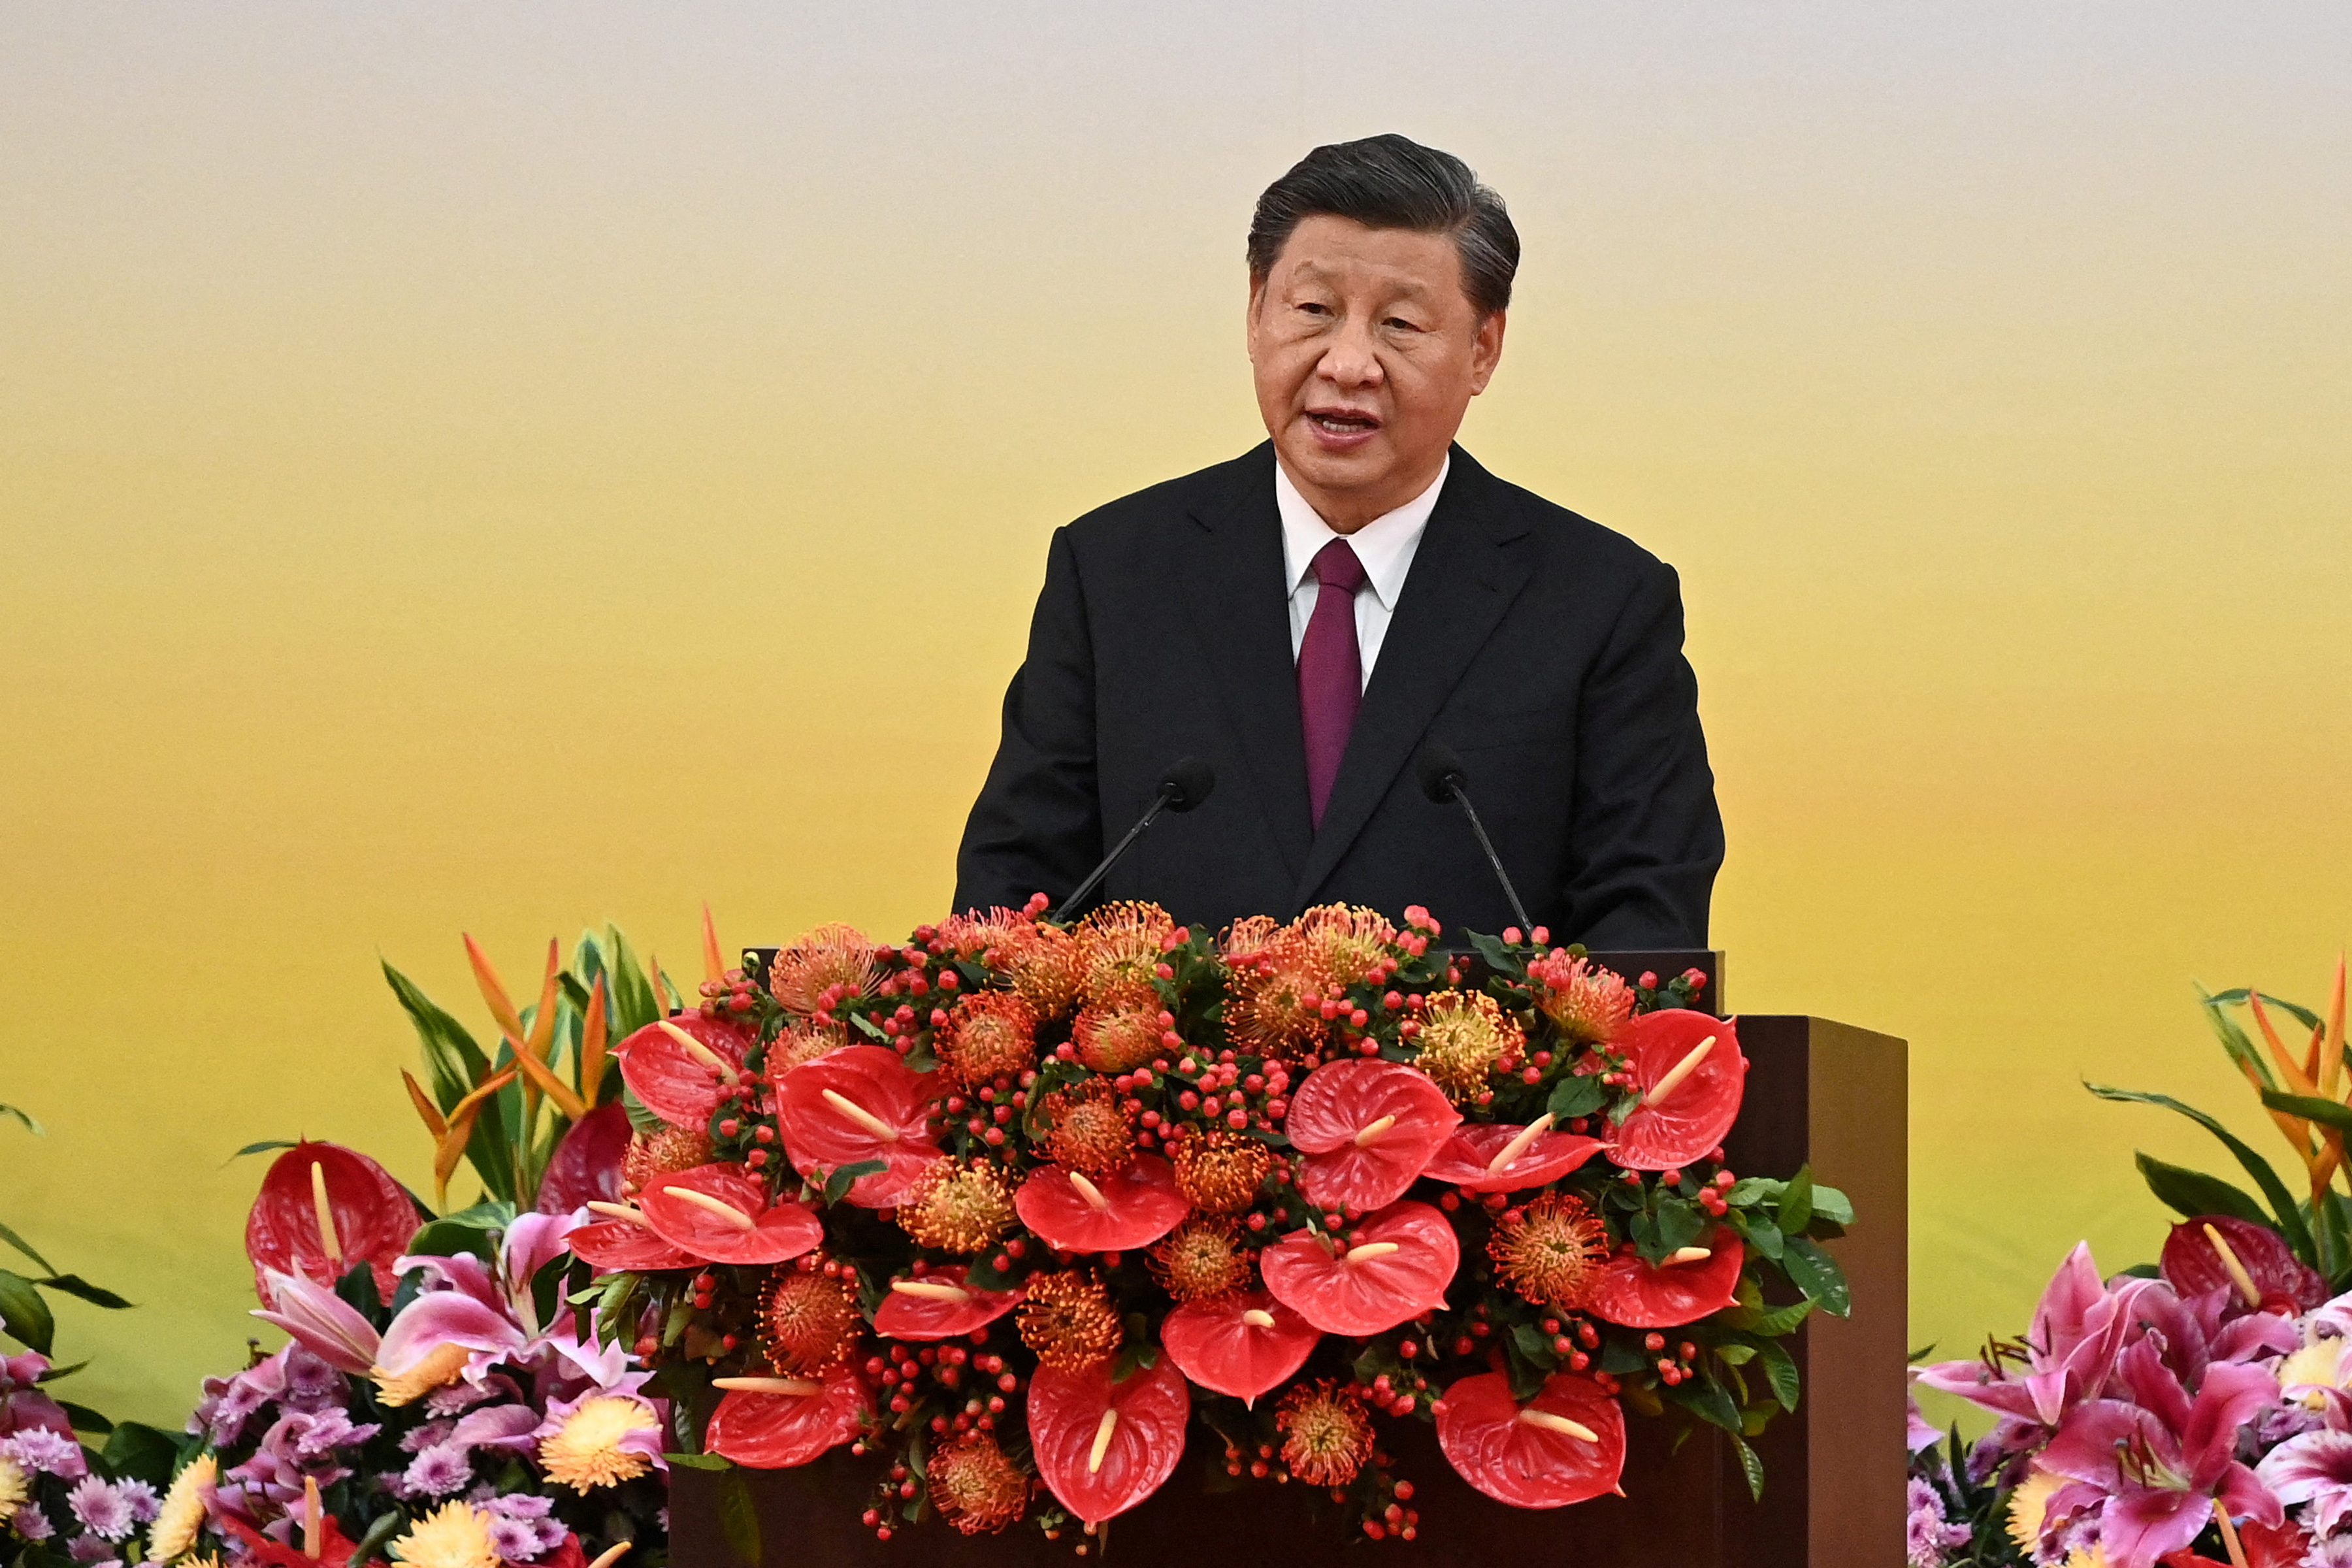 China's President Xi Jinping gives a speech following a swearing-in ceremony to inaugurate the city's new leader and government in Hong Kong